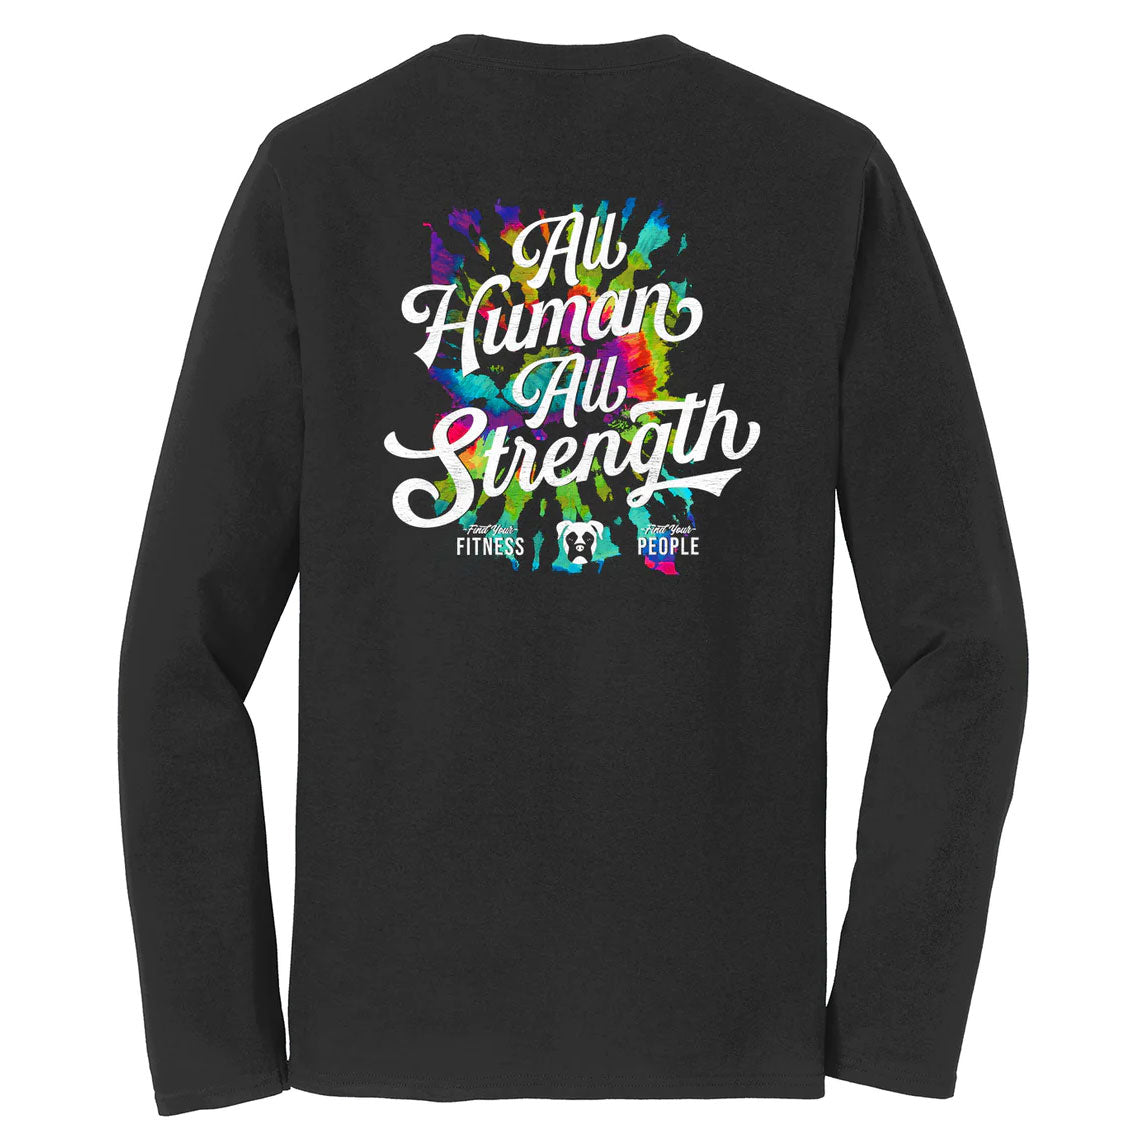 Built By All Strength Full Color Long Sleeve Tee